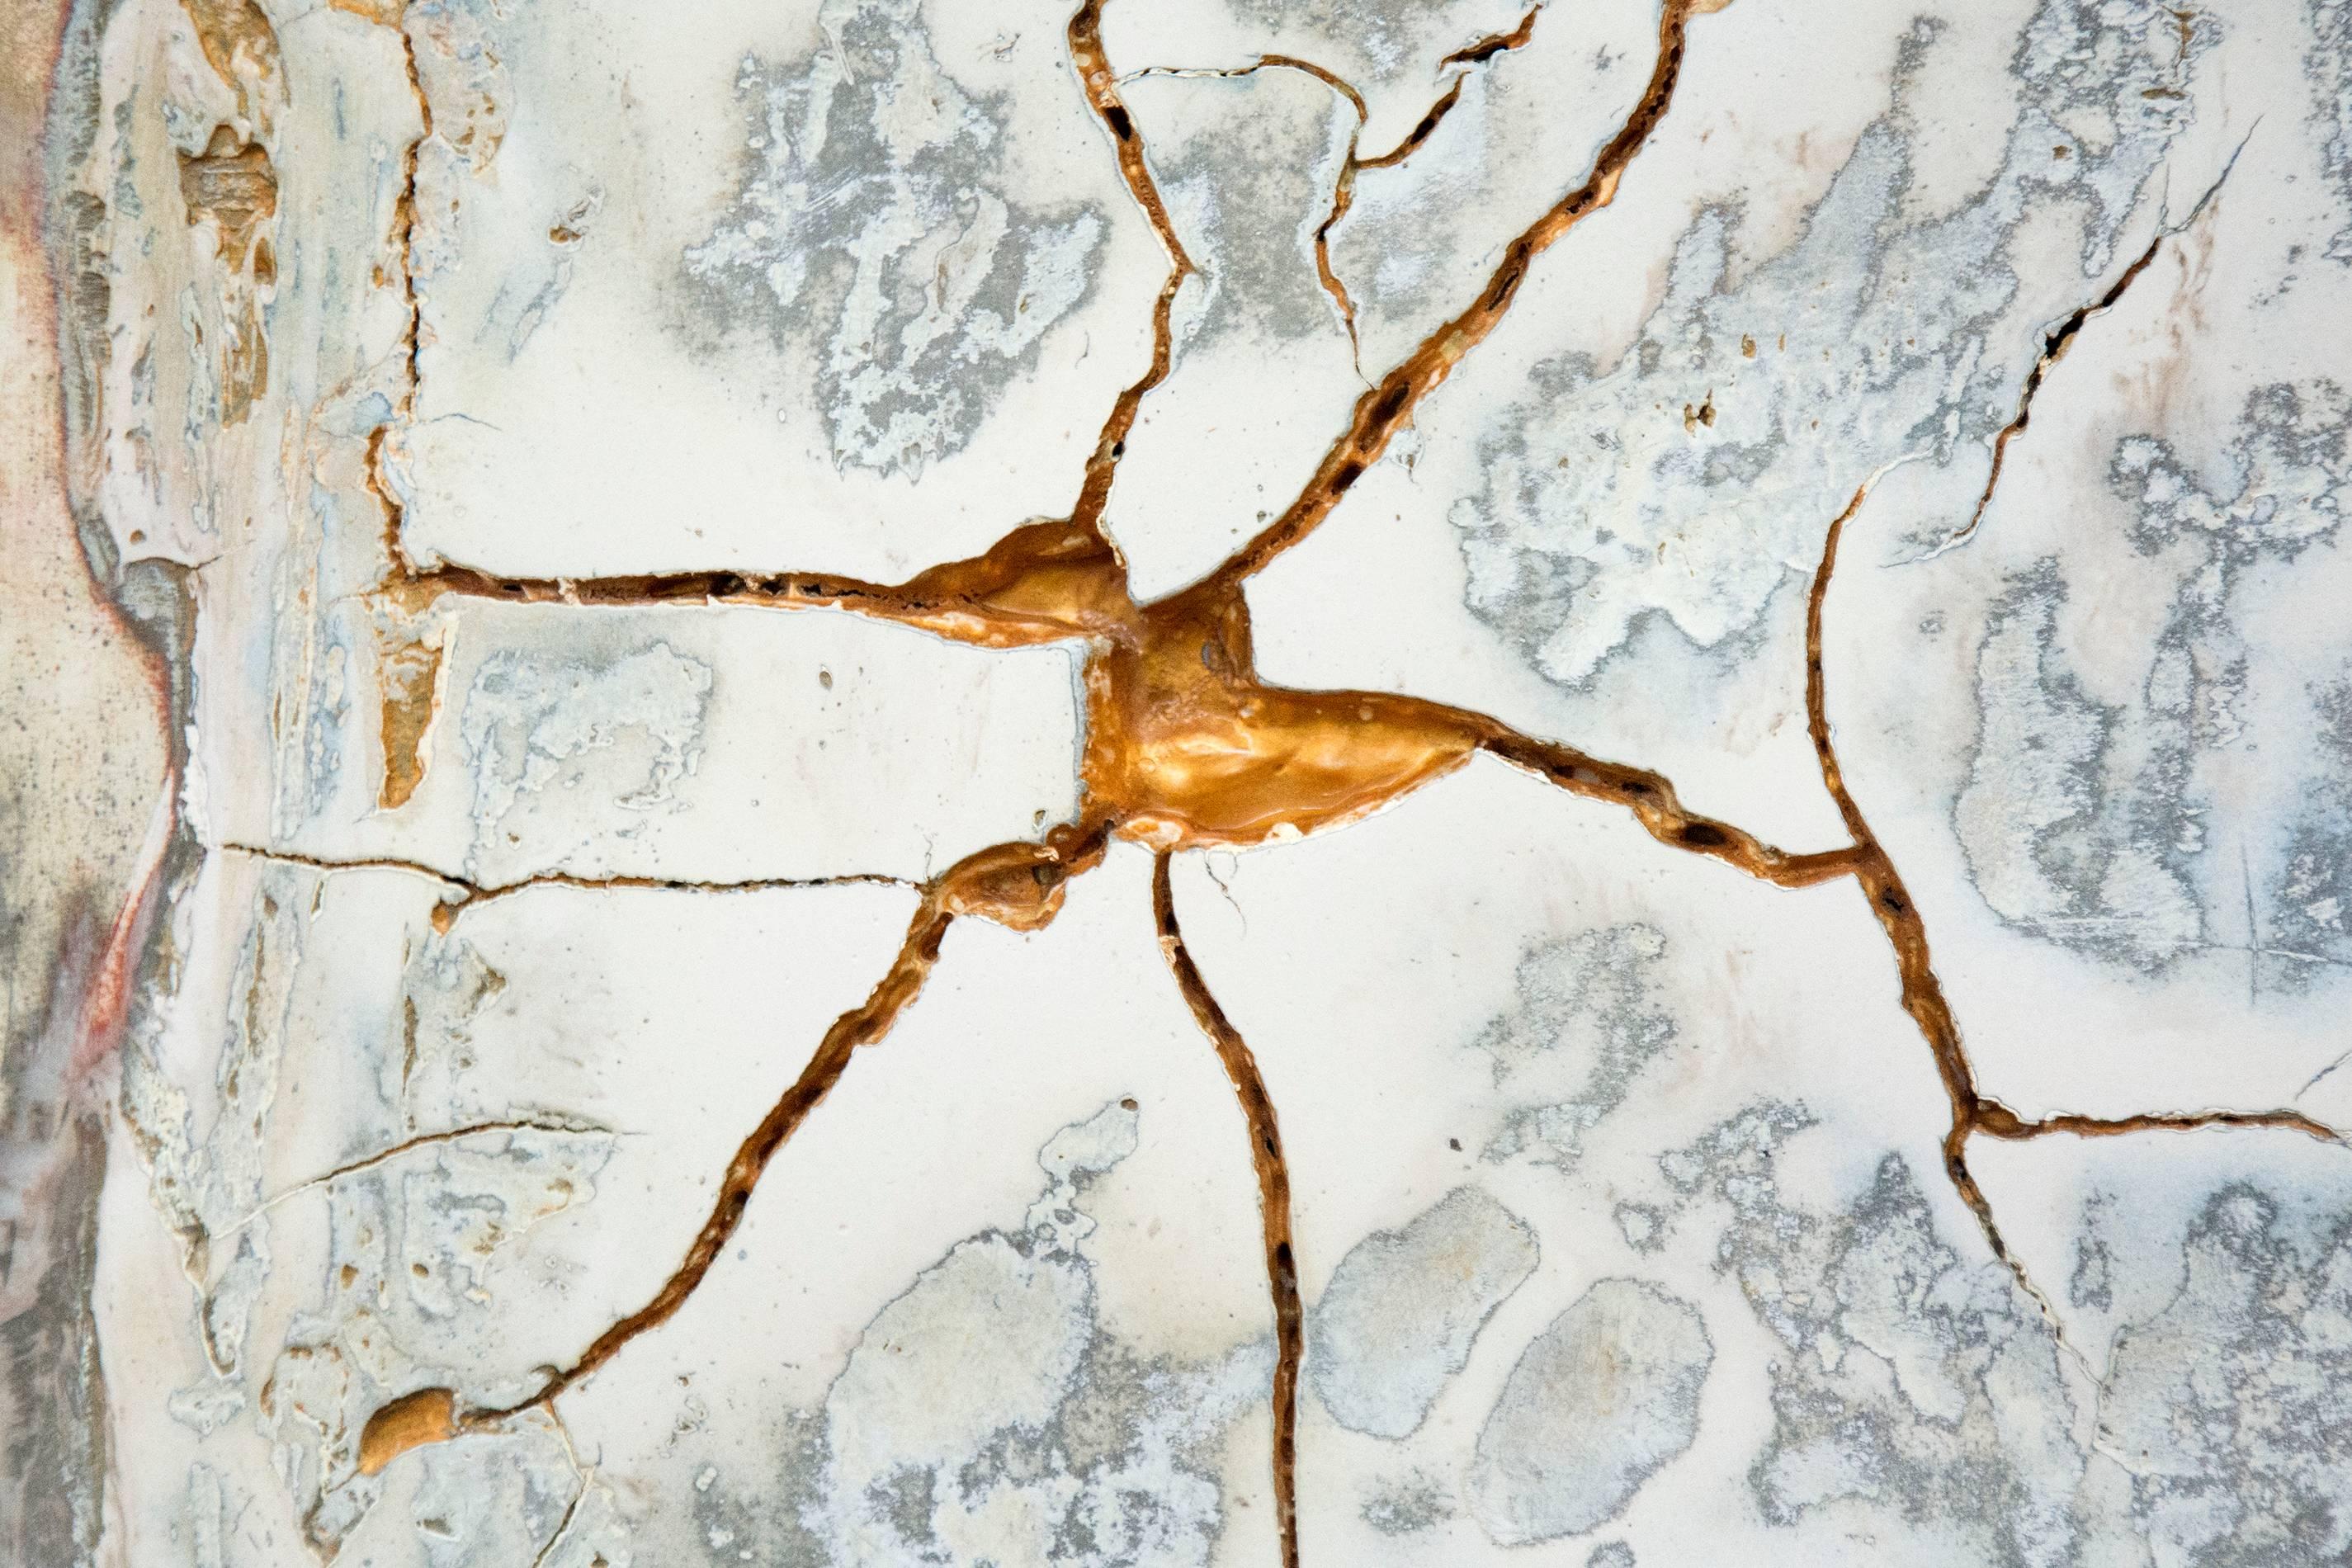 A narrative of organic shapes, cracks, lines and dents articulated in plaster and pigment -- Prussian blue, Payne's gray, ochre and reflective gold -- suggests an ancient palimpsest or Venetian fresco. 

Naim's artwork explores the creative